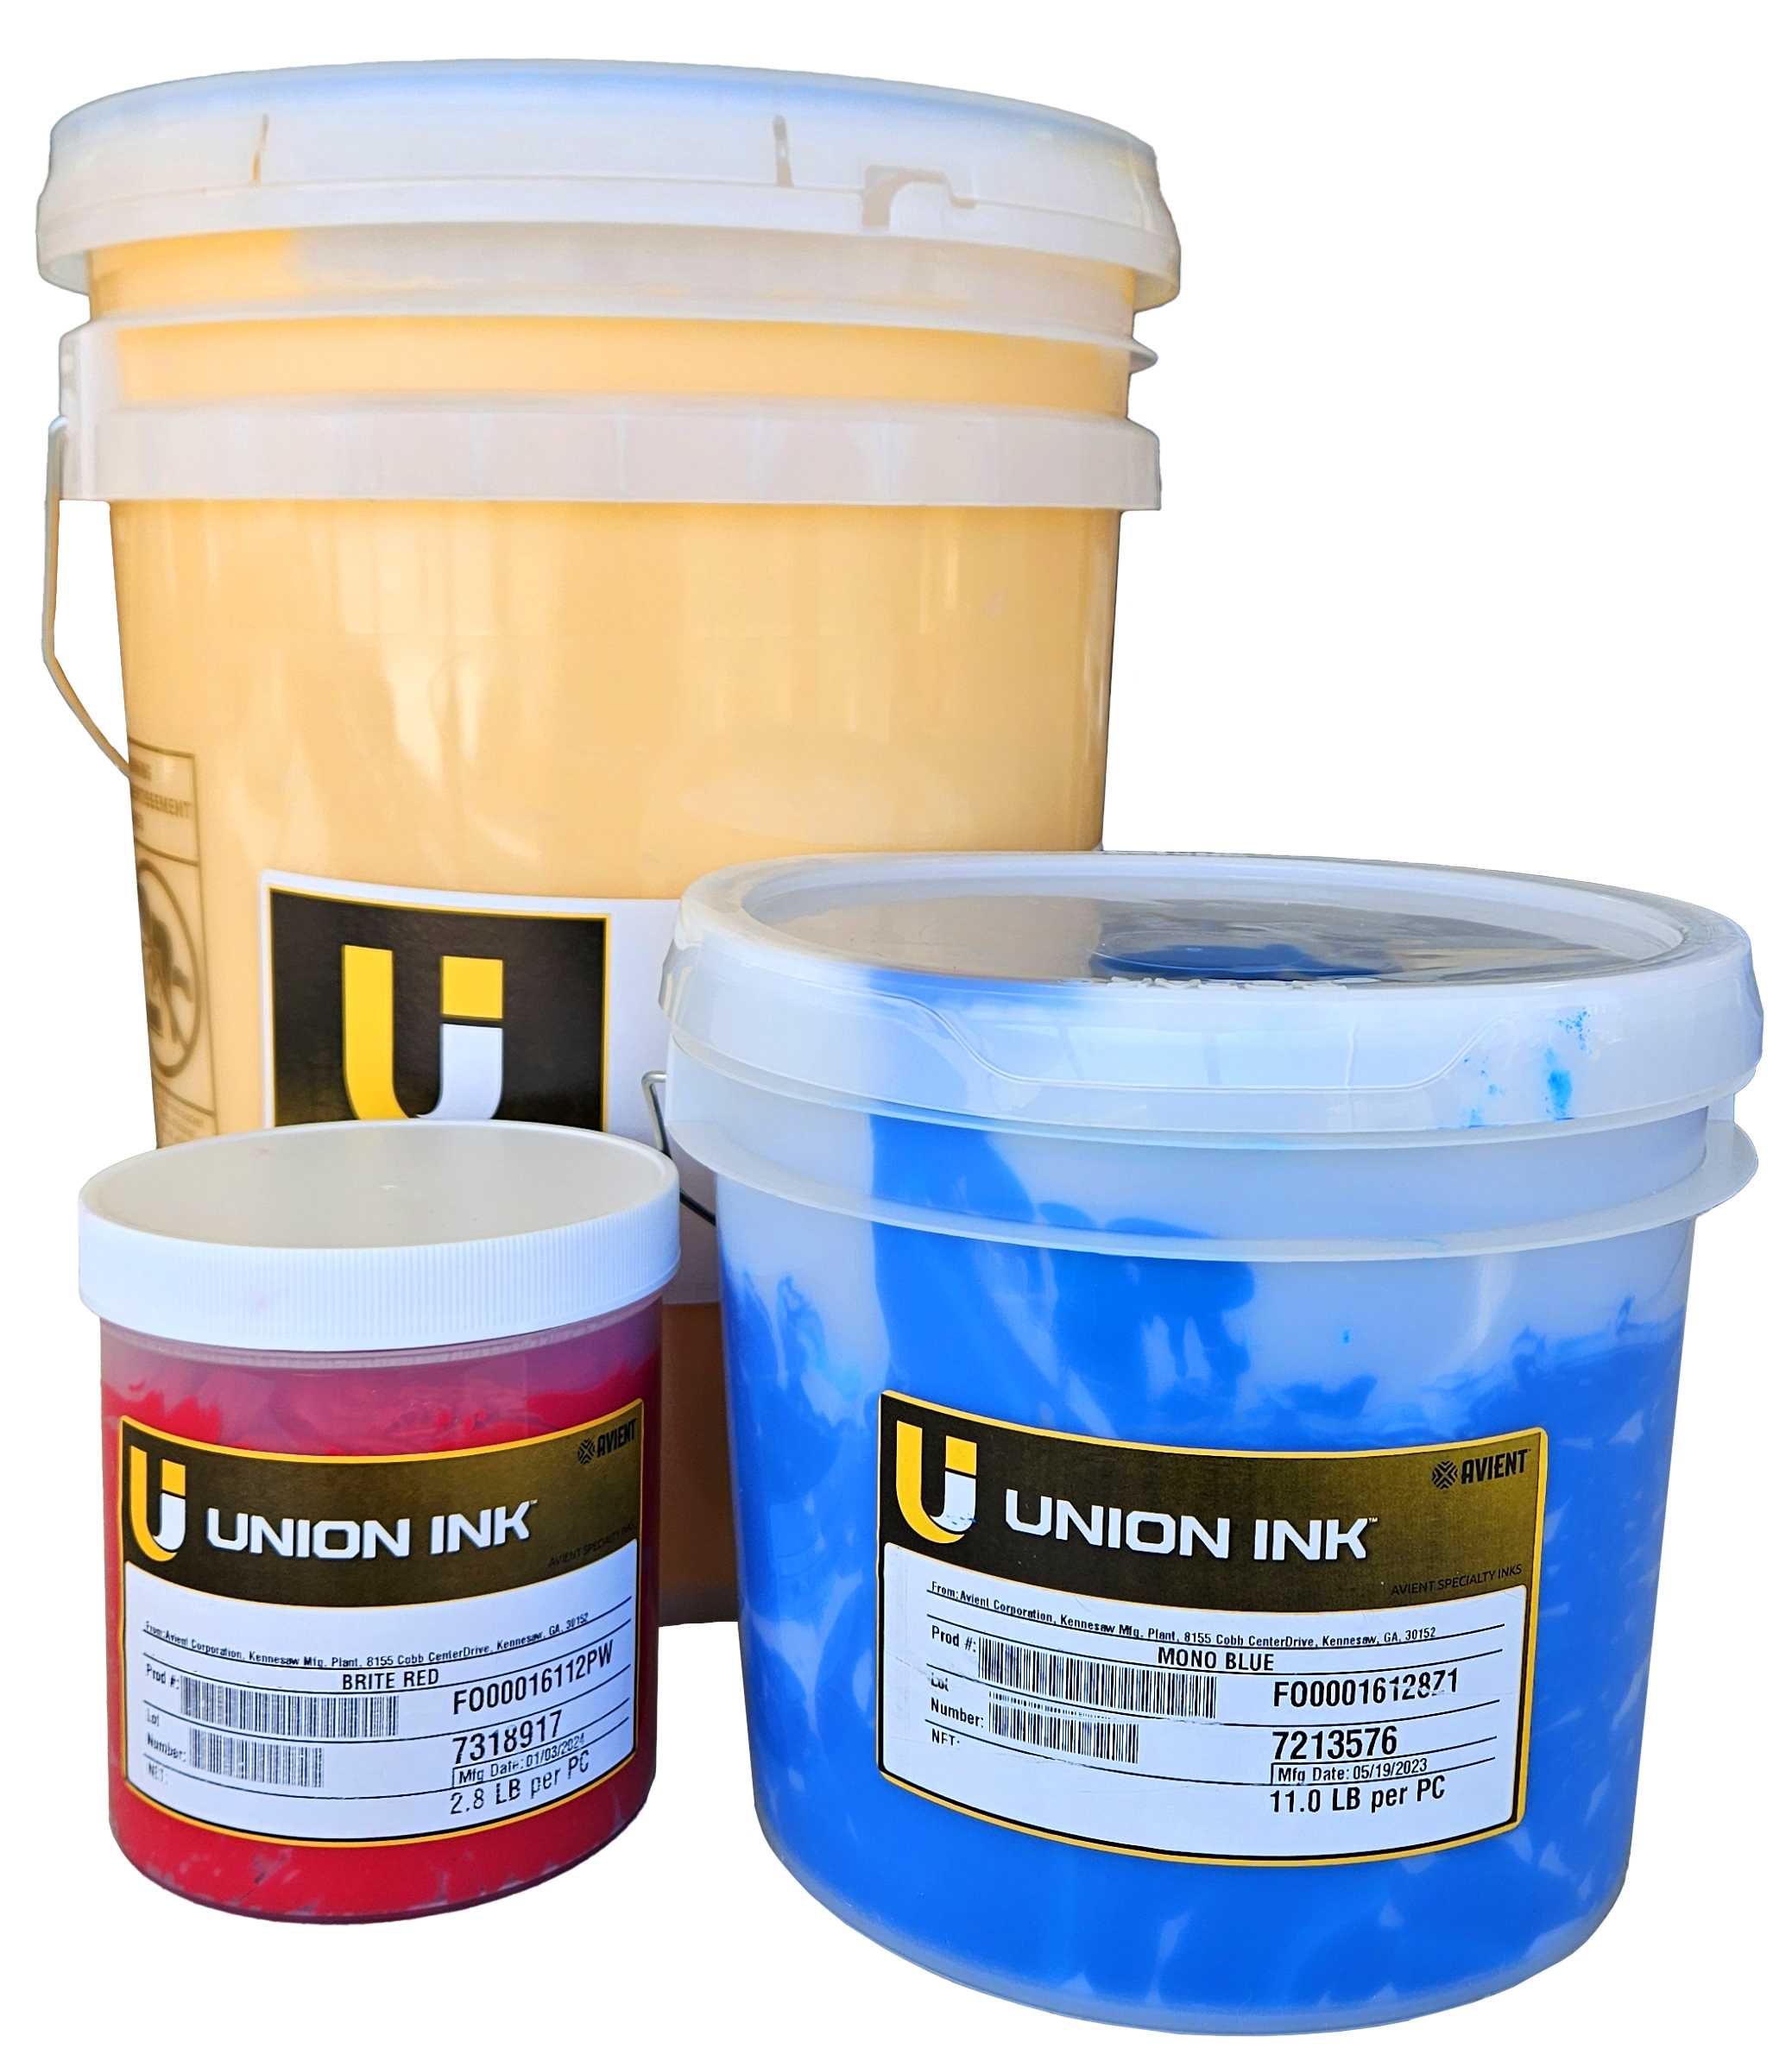 <h2> FOR DIRECT OR TRANSFER PRINTING </h2> Highly versatile, lead-free type plastisol inks formulated for heat transfer and wet-on-wet direct printing with good opacity for medium-colored cotton and cotton/polyester garments.   Direct prints have a soft finish.   PLUE inks can be used to produce either Ultrasoft or regular heat transfer, depending upon transfer methods used.   PLUE inks have been specially formulated to work in a variety of applications, enabling the printer to maintain a reduced inventory of specialty inks. For Soft Hand Base use AV-K2922 Soft Hand Clear locatd under Plastisol Additives.